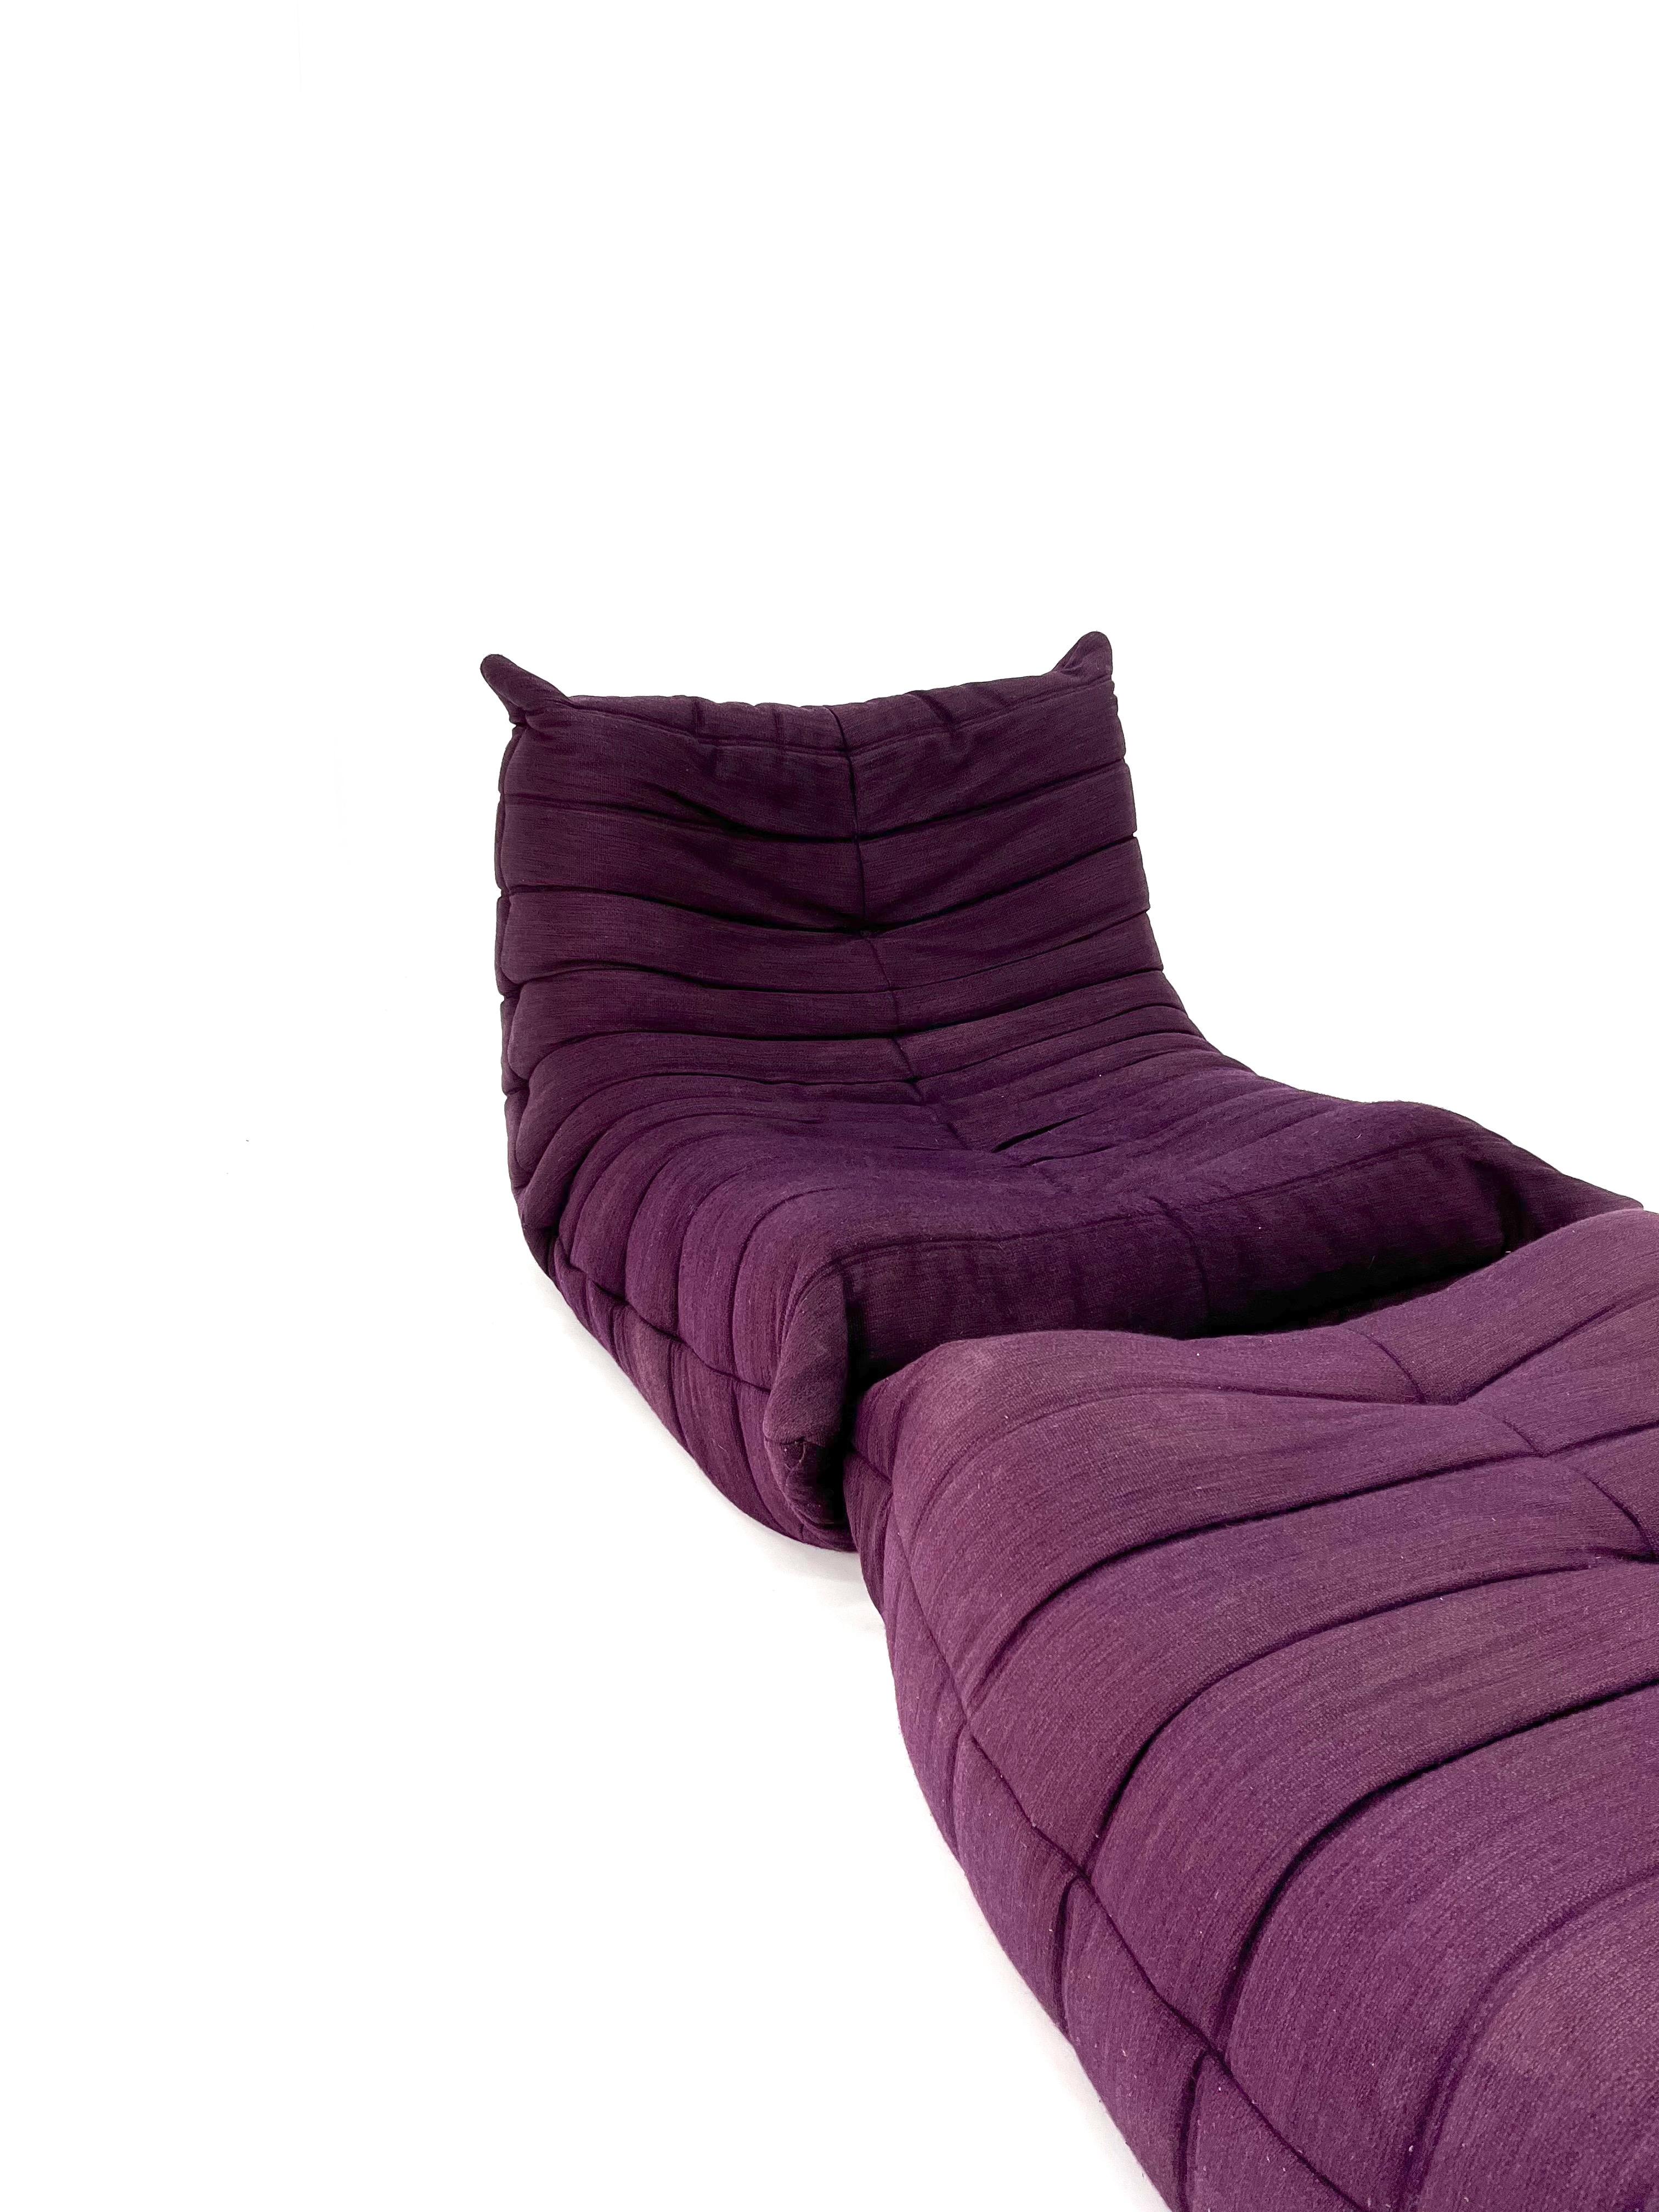 Togo Chair and Ottoman in Purple by Michel Ducaroy for Ligne Roset For Sale 4